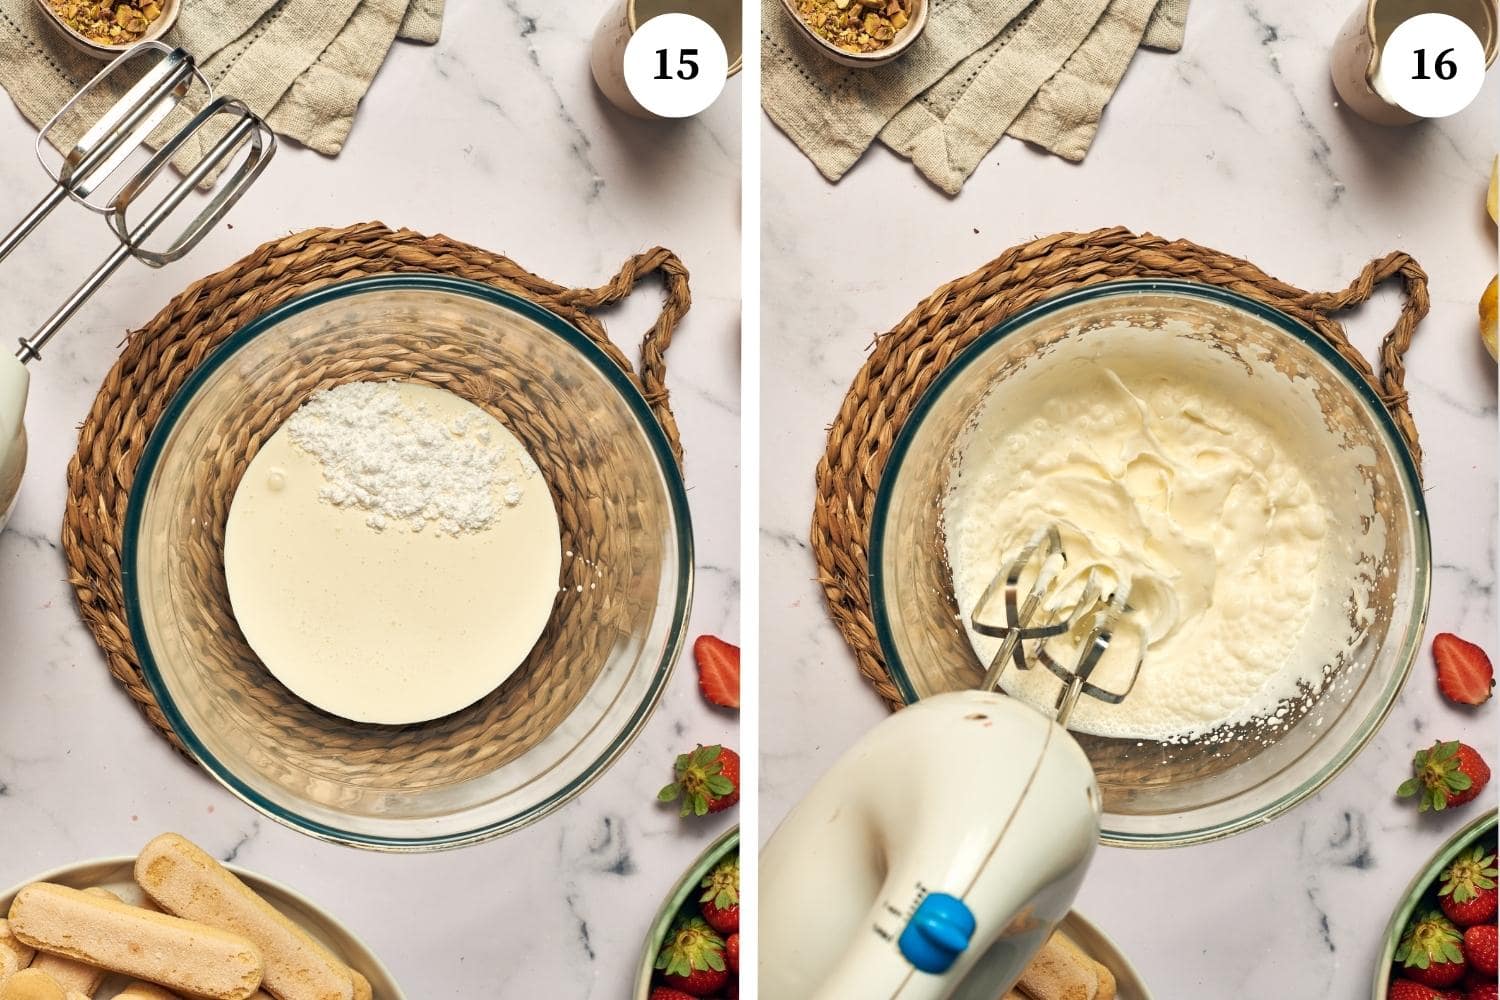 Process for making whipped cream: place the whipping cream in a bowl with the powdered sugar and whip until soft peaks form.